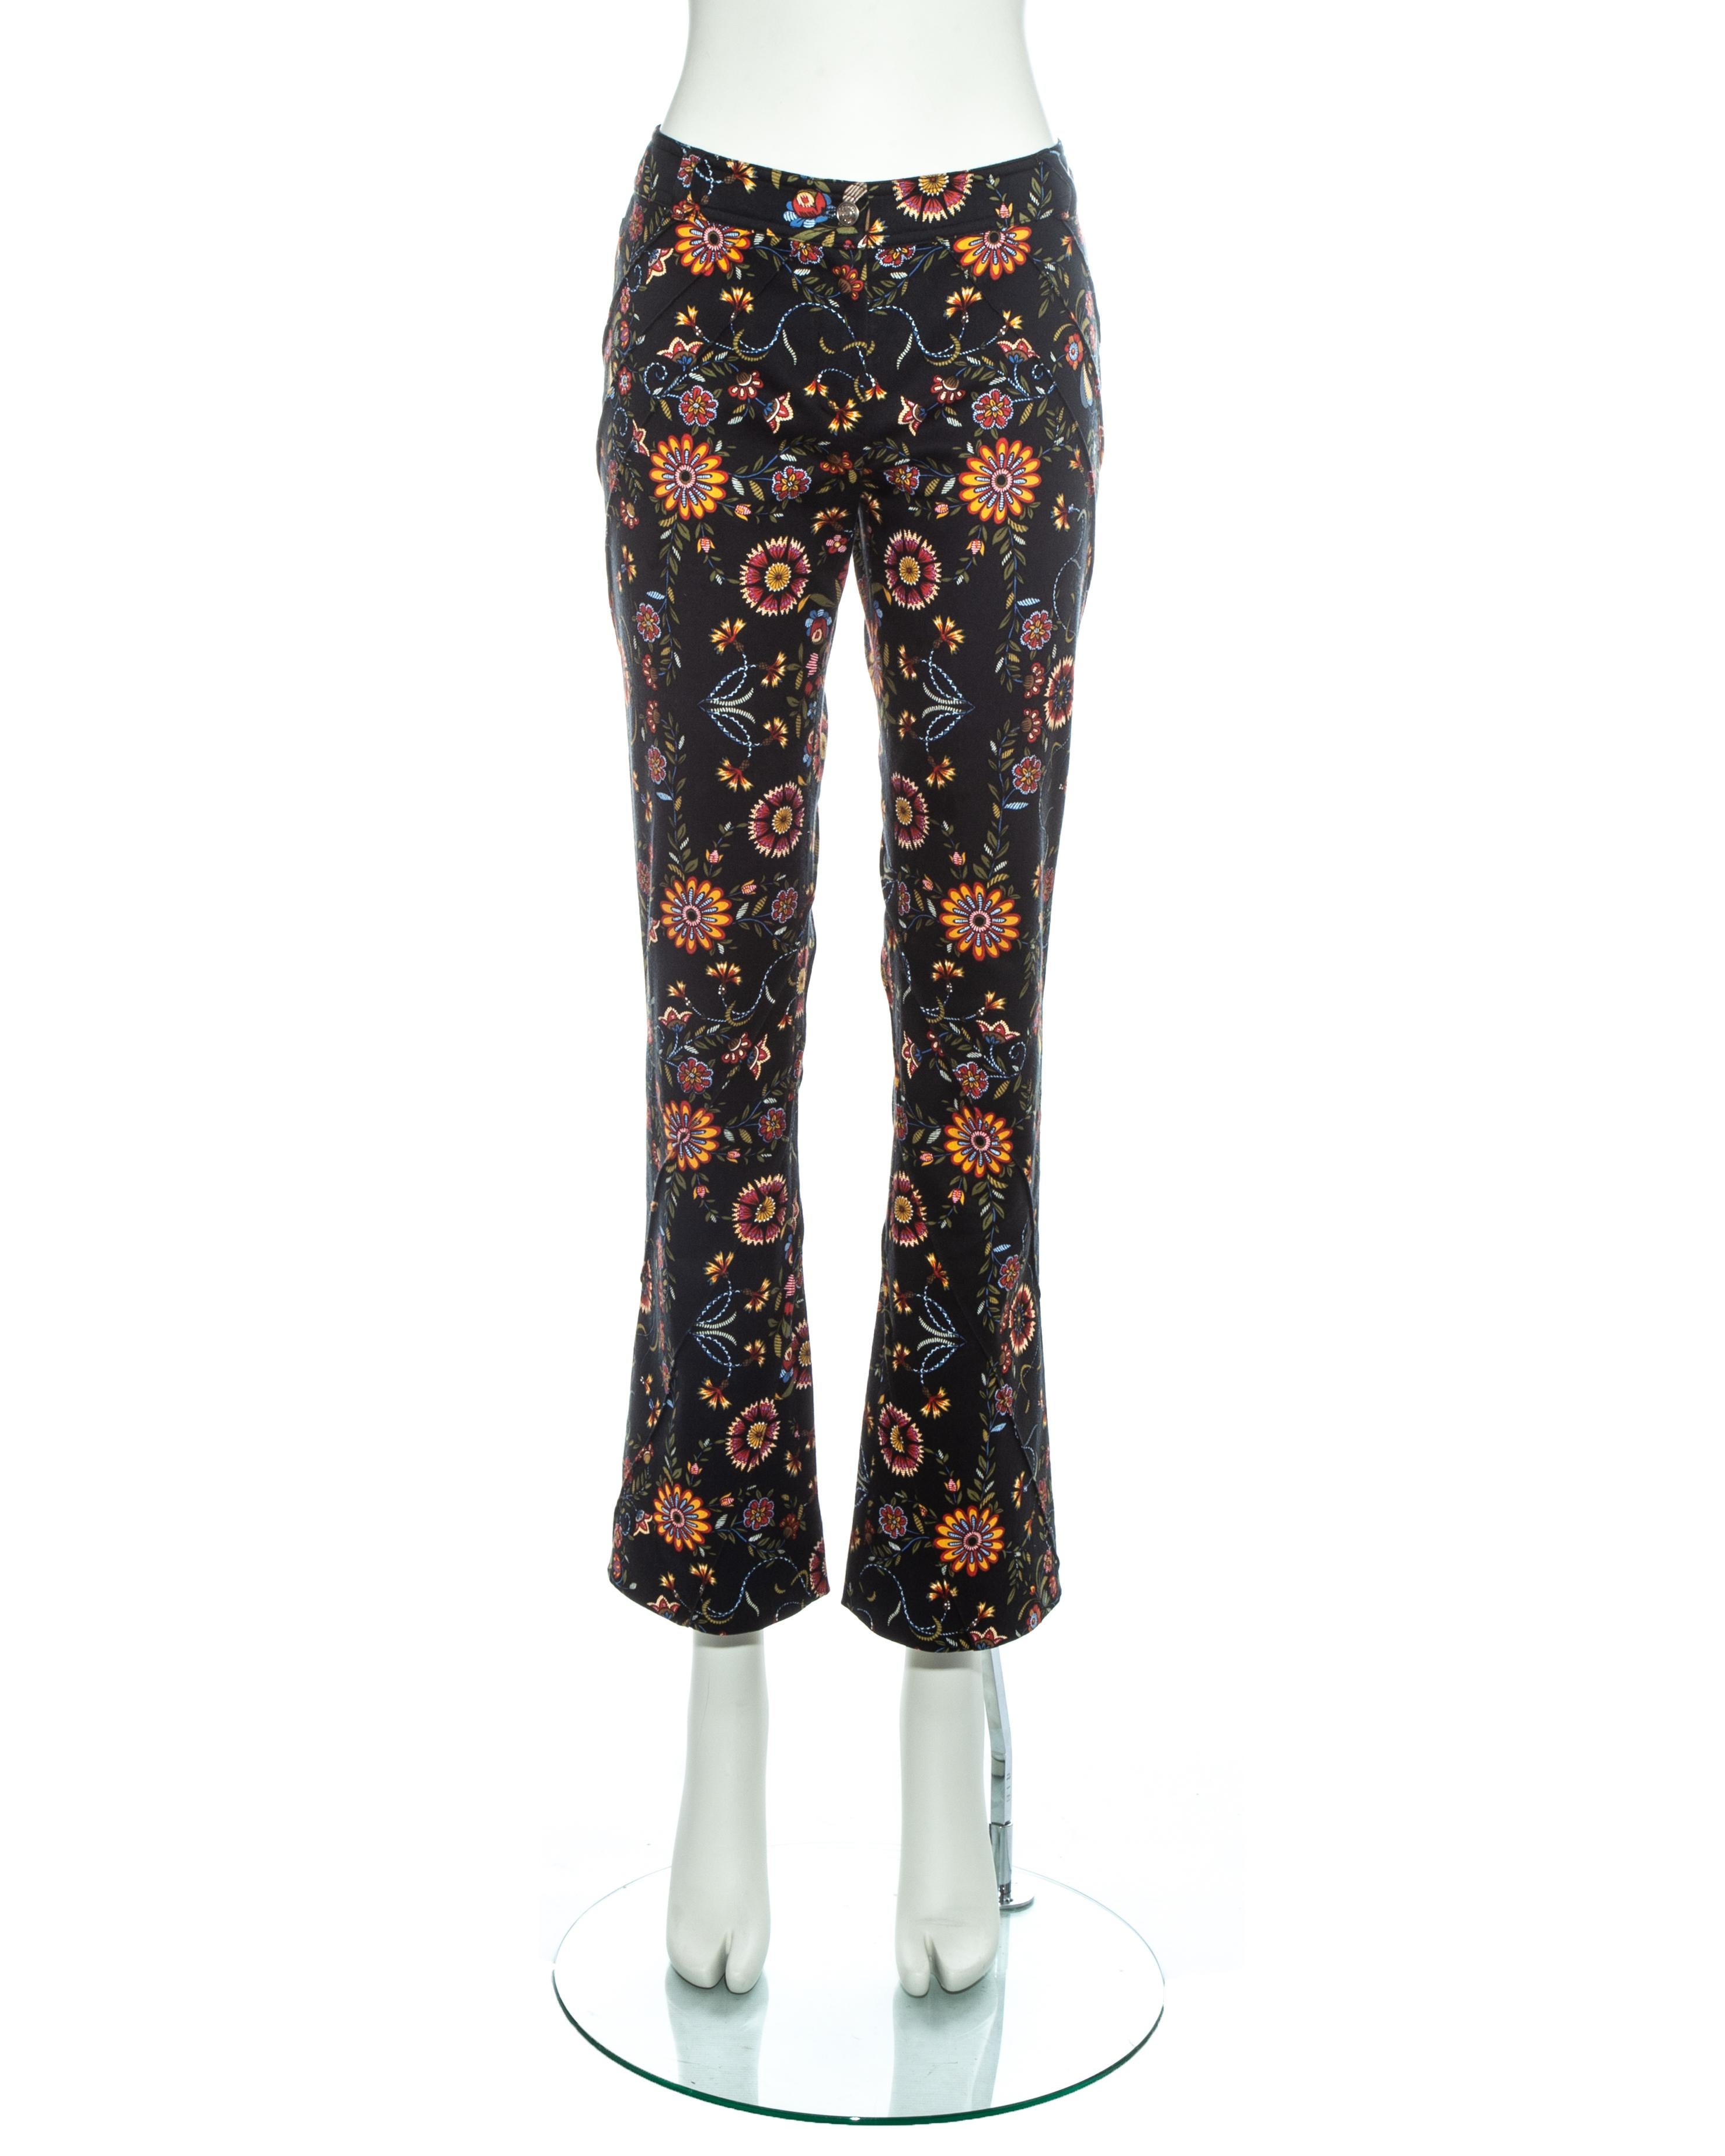 Christian Dior by John Galliano floral printed cotton flared pants

Fall-Winter 2002